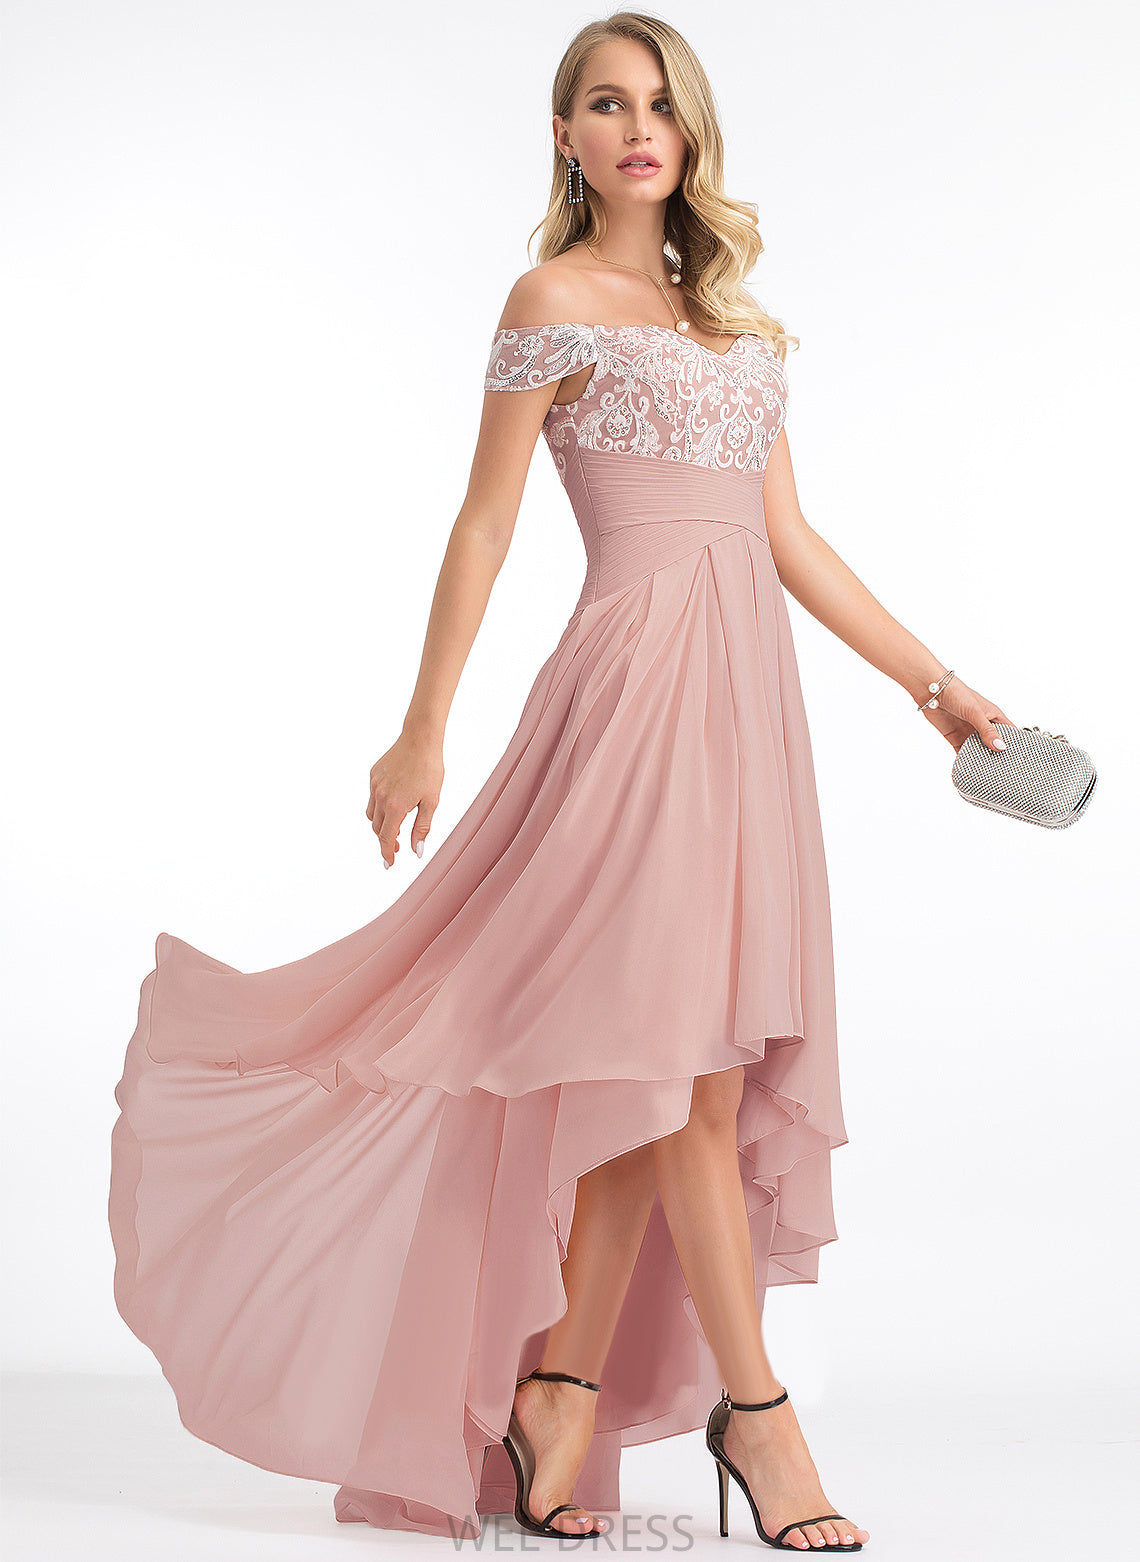 Lace Prom Dresses Pleated Chiffon With Off-the-Shoulder A-Line Brynn Asymmetrical